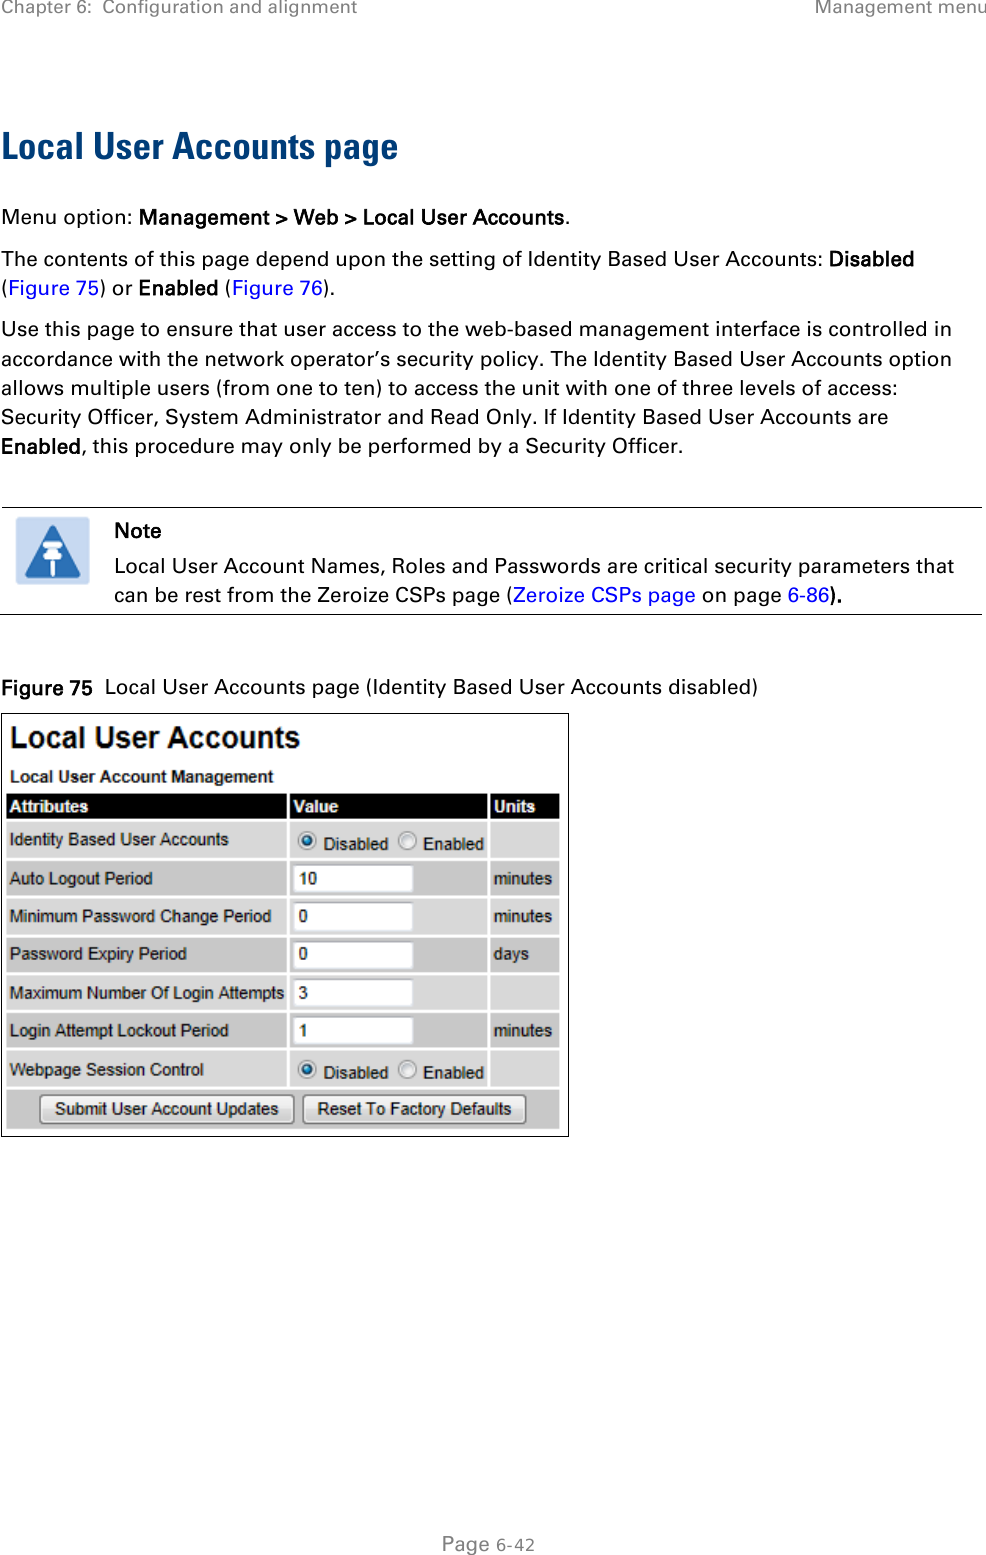 Chapter 6:  Configuration and alignment Management menu  Local User Accounts page Menu option: Management &gt; Web &gt; Local User Accounts. The contents of this page depend upon the setting of Identity Based User Accounts: Disabled (Figure 75) or Enabled (Figure 76). Use this page to ensure that user access to the web-based management interface is controlled in accordance with the network operator’s security policy. The Identity Based User Accounts option allows multiple users (from one to ten) to access the unit with one of three levels of access: Security Officer, System Administrator and Read Only. If Identity Based User Accounts are Enabled, this procedure may only be performed by a Security Officer.   Note Local User Account Names, Roles and Passwords are critical security parameters that can be rest from the Zeroize CSPs page (Zeroize CSPs page on page 6-86).  Figure 75  Local User Accounts page (Identity Based User Accounts disabled)   Page 6-42 